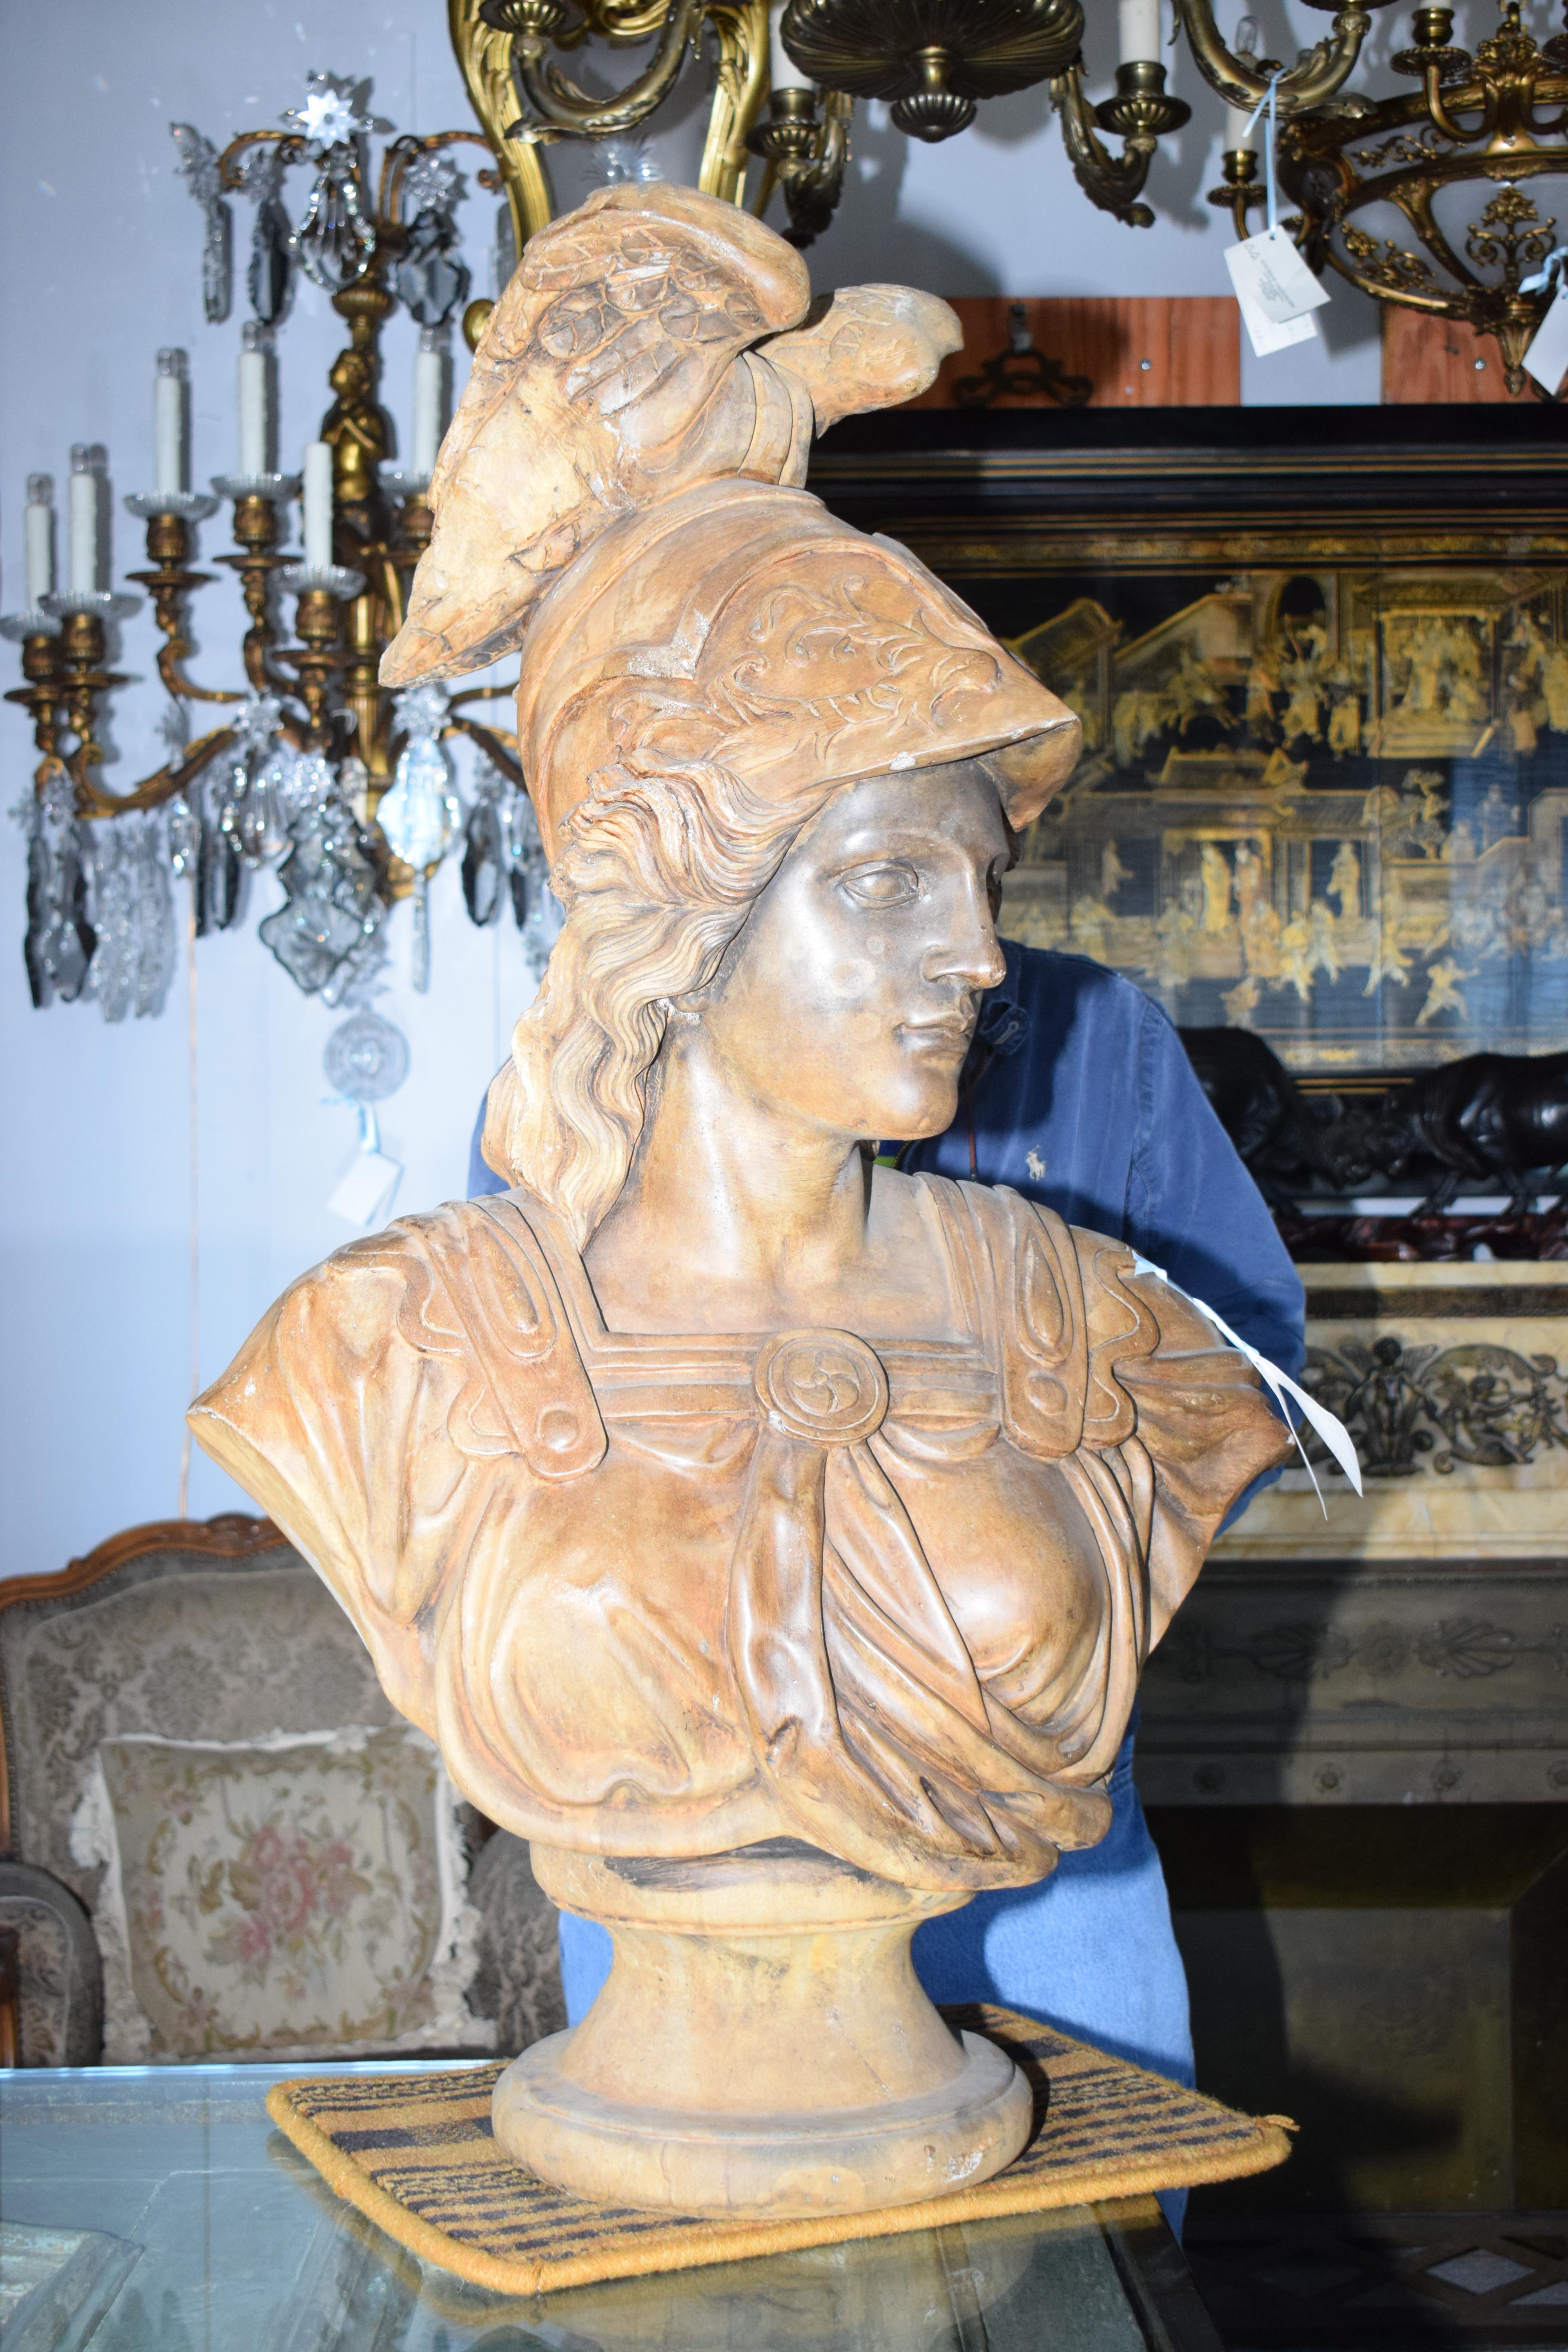 Bust of Minerva. Depicting the Goddess with wings crested helmet, resting on a conforming stand. France, circa 1920.
Dimensions: Height 39 1/2